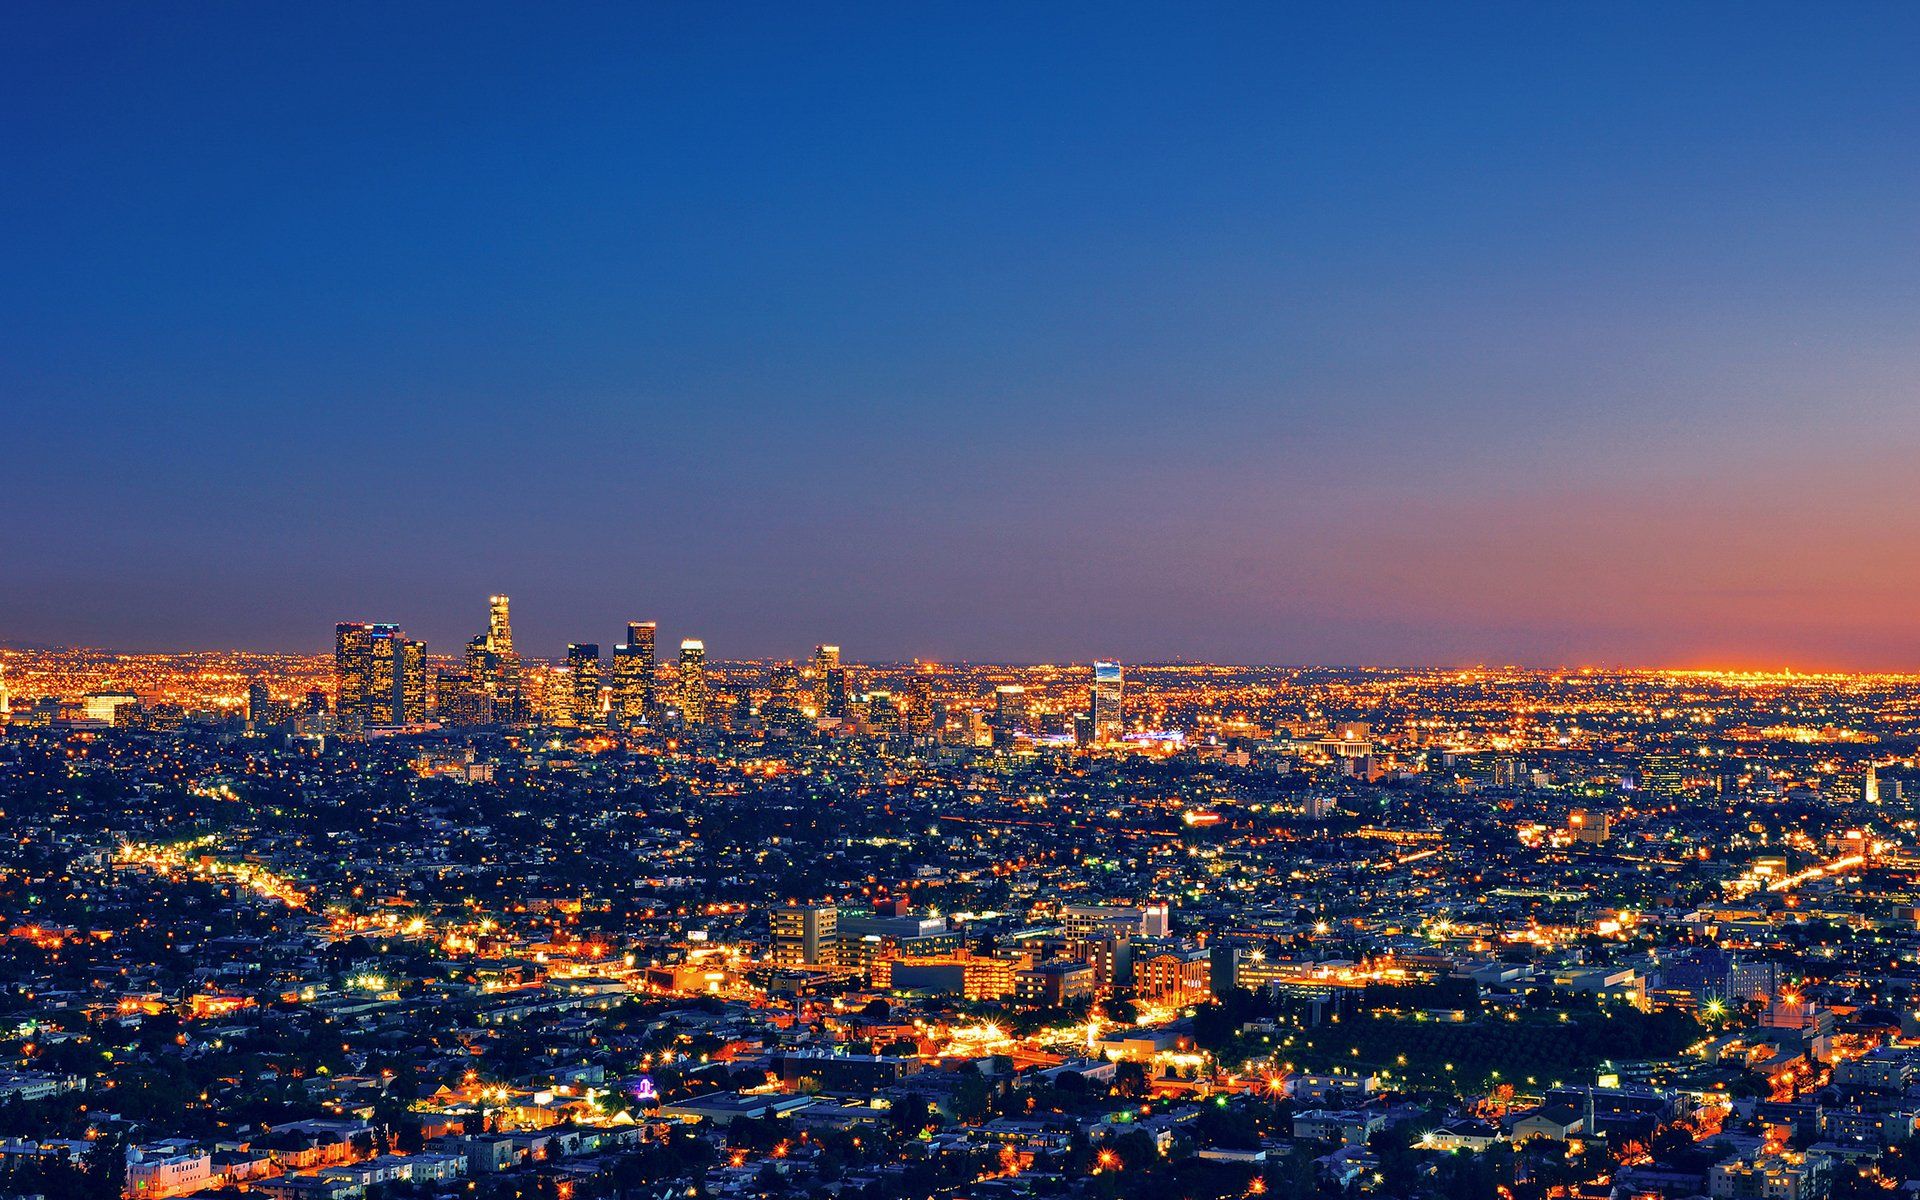 Los Angeles cityscape at night, viewed from the Griffith Observatory - Los Angeles